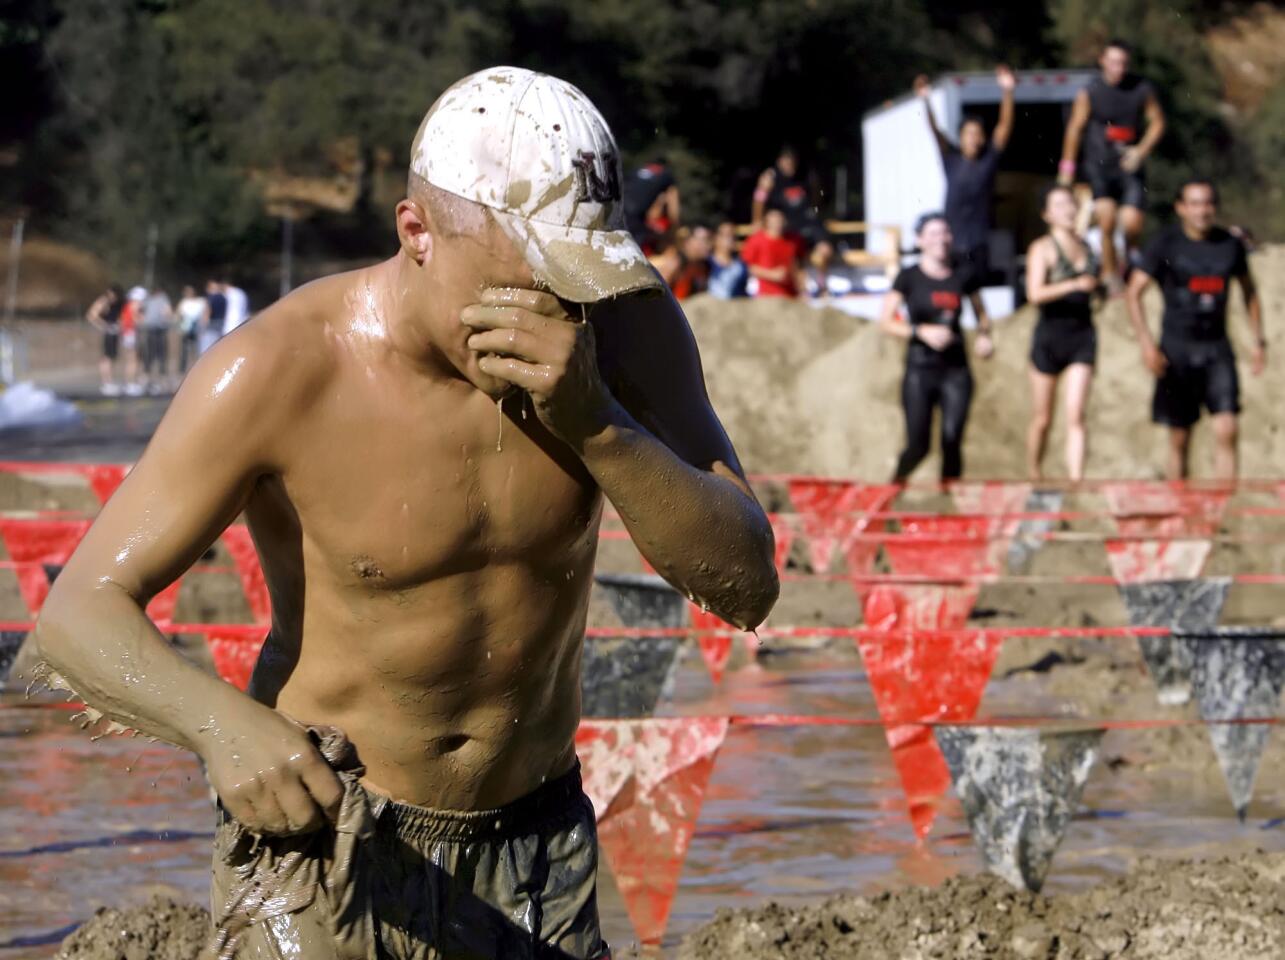 A participant clears mud from his eyes after the mud crawl station of the Gladiator Rock 'n Run.